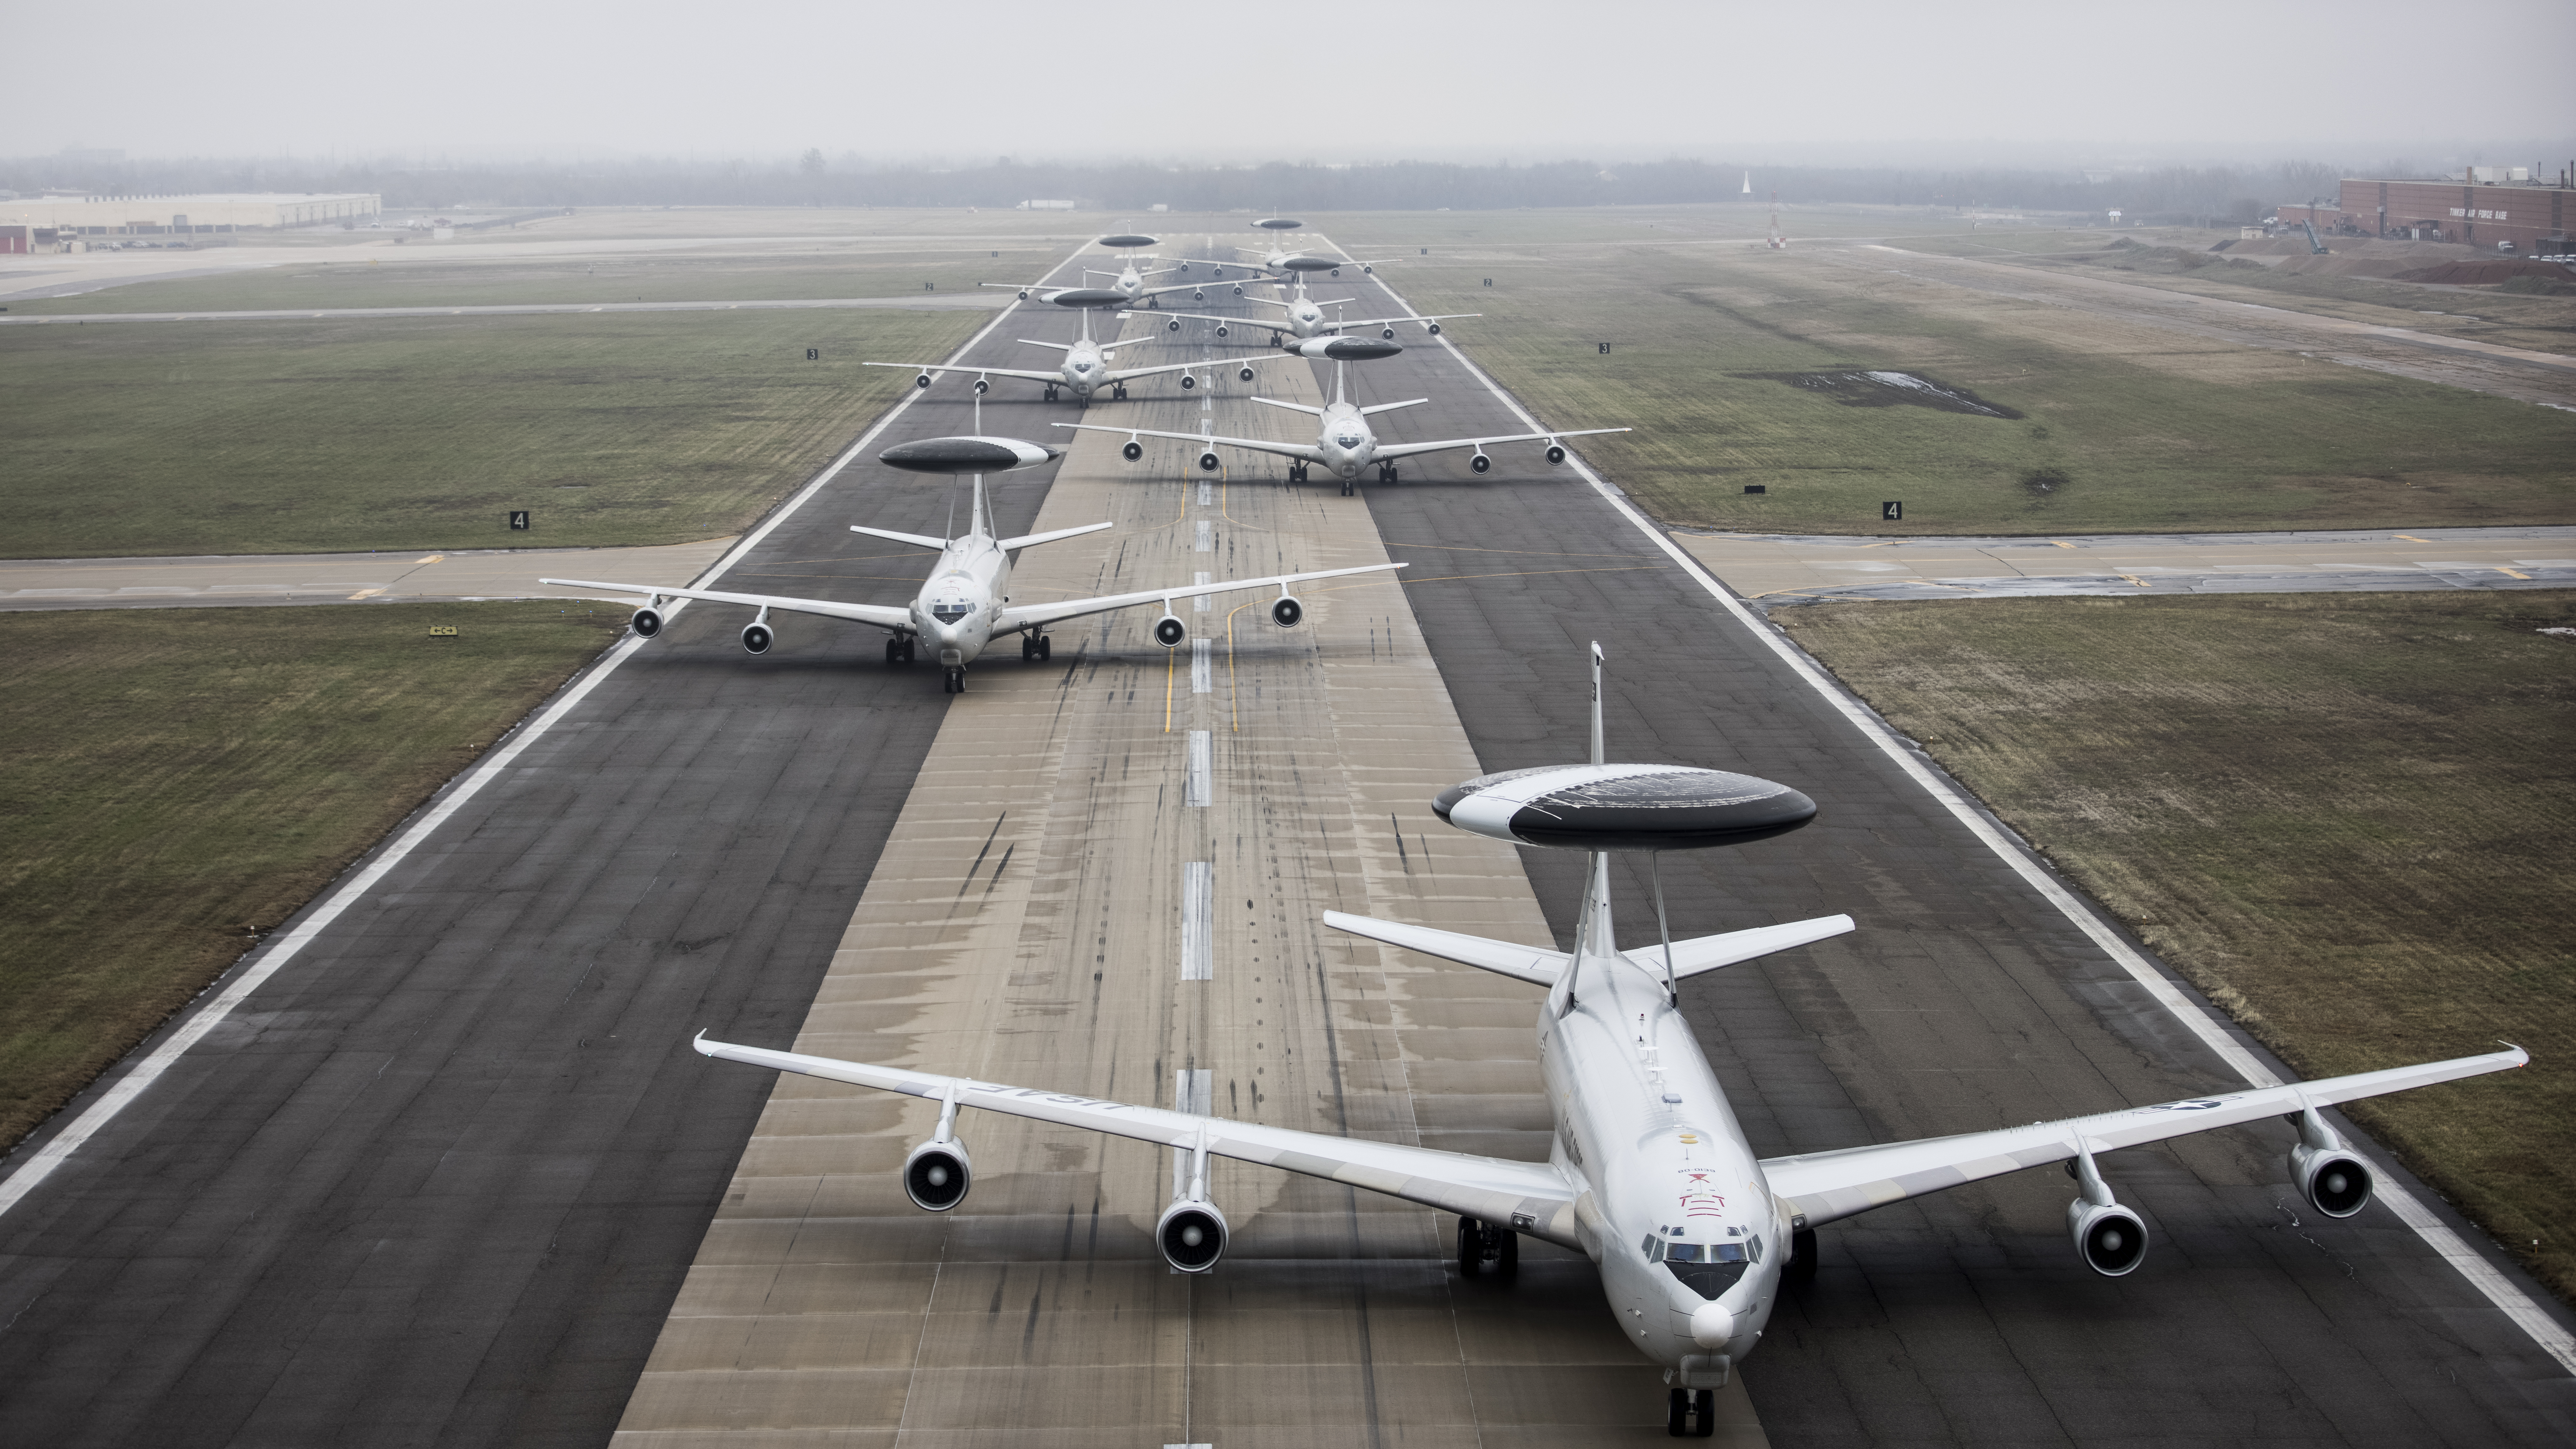 The US Air Force demonstrated the elephant walk of the Boeing E-3 Sentry by taking several planes into the sky simultaneously